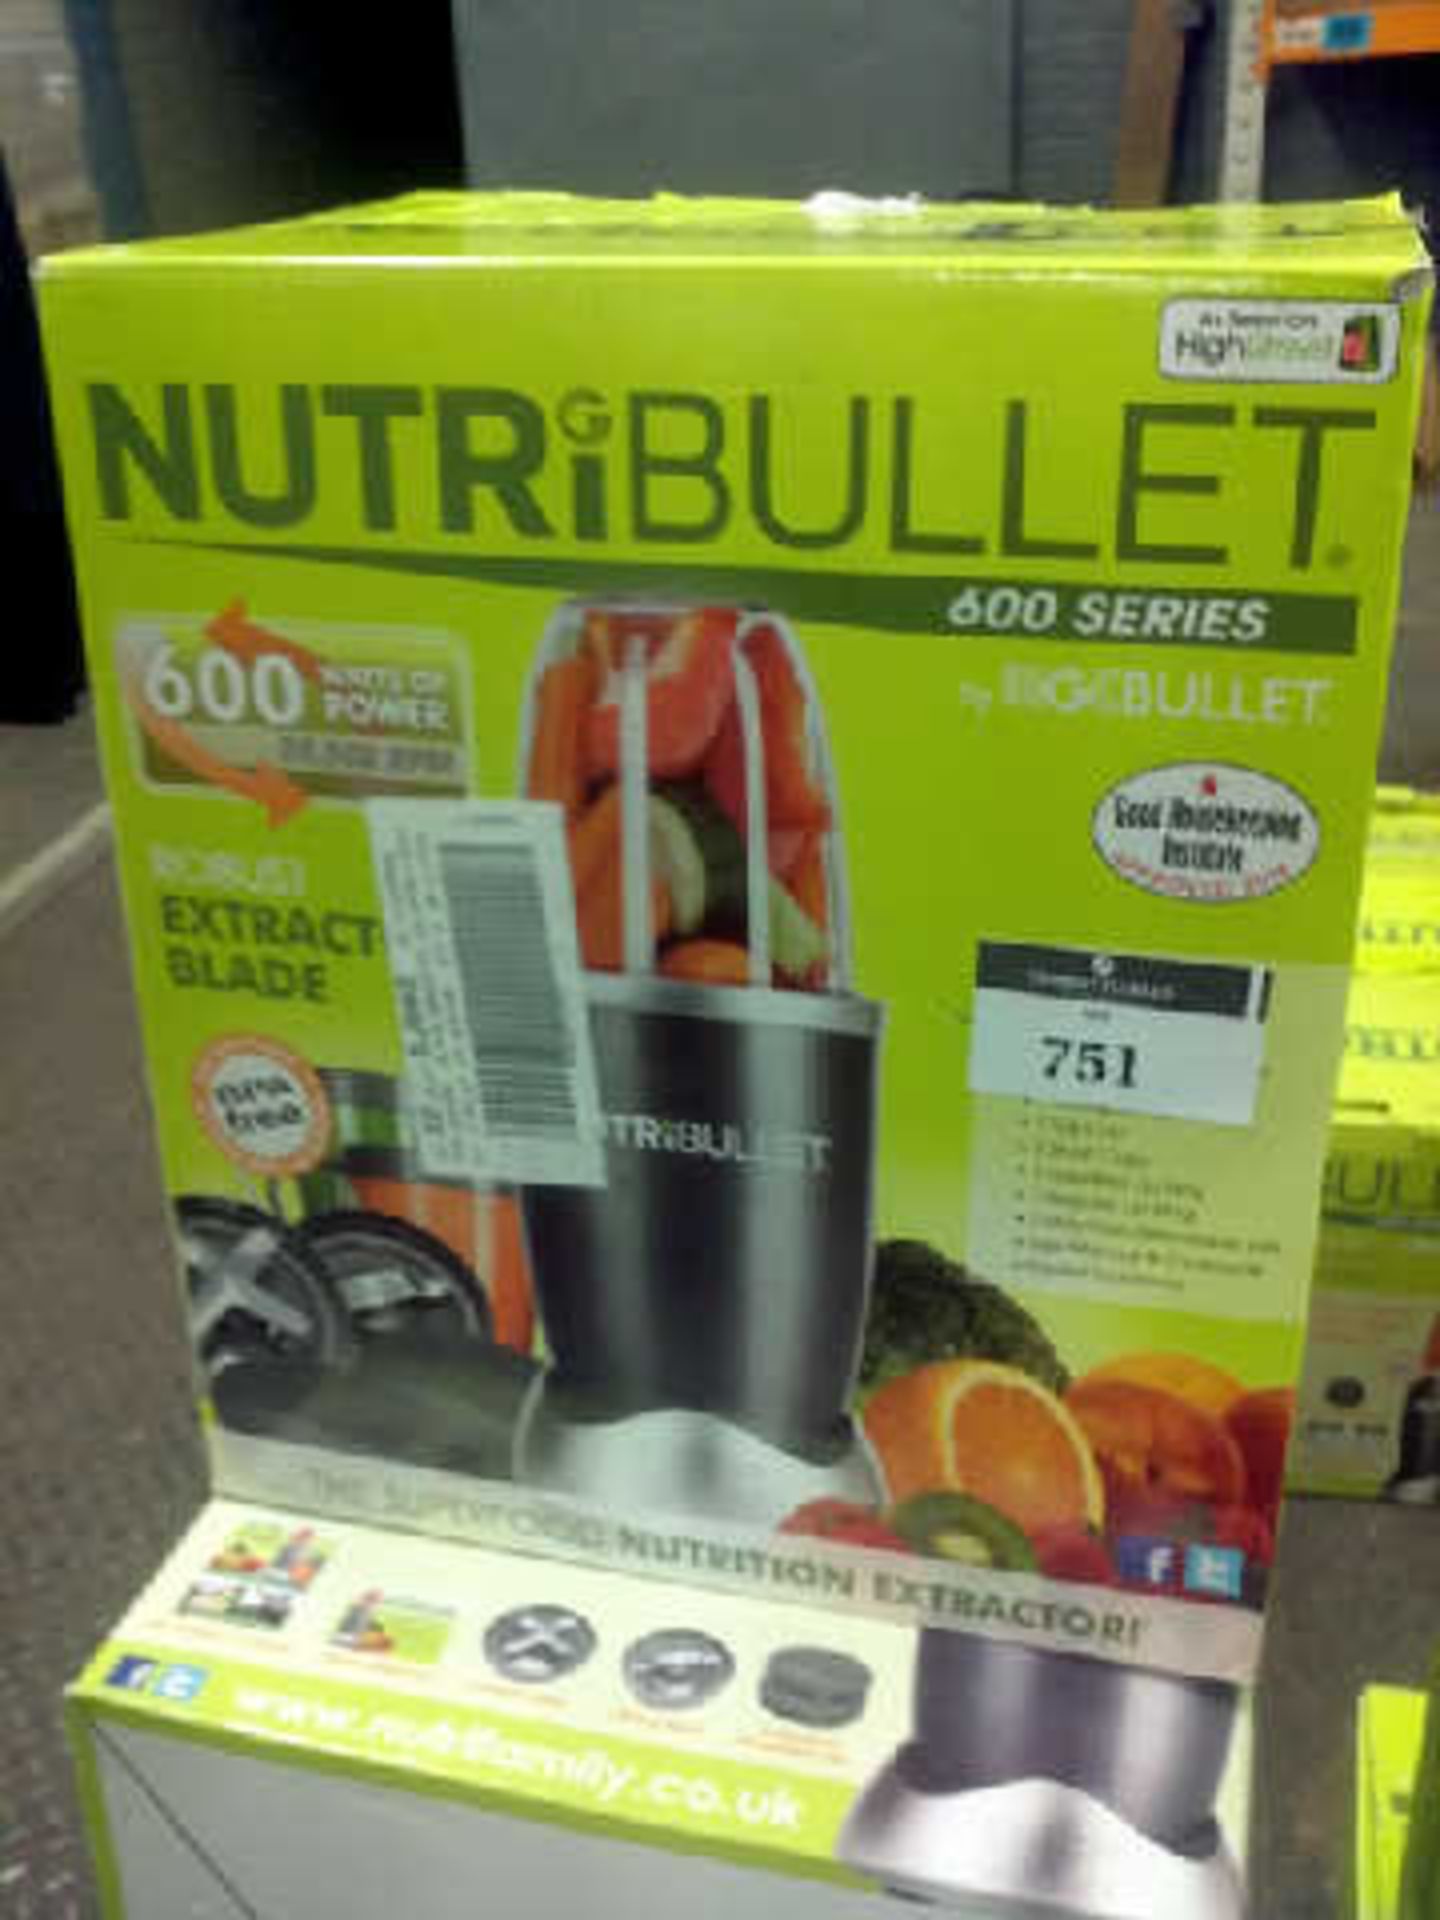 6 BOXED NUTRI BULLET 600 SERIES NUTRITION EXTRACTORS